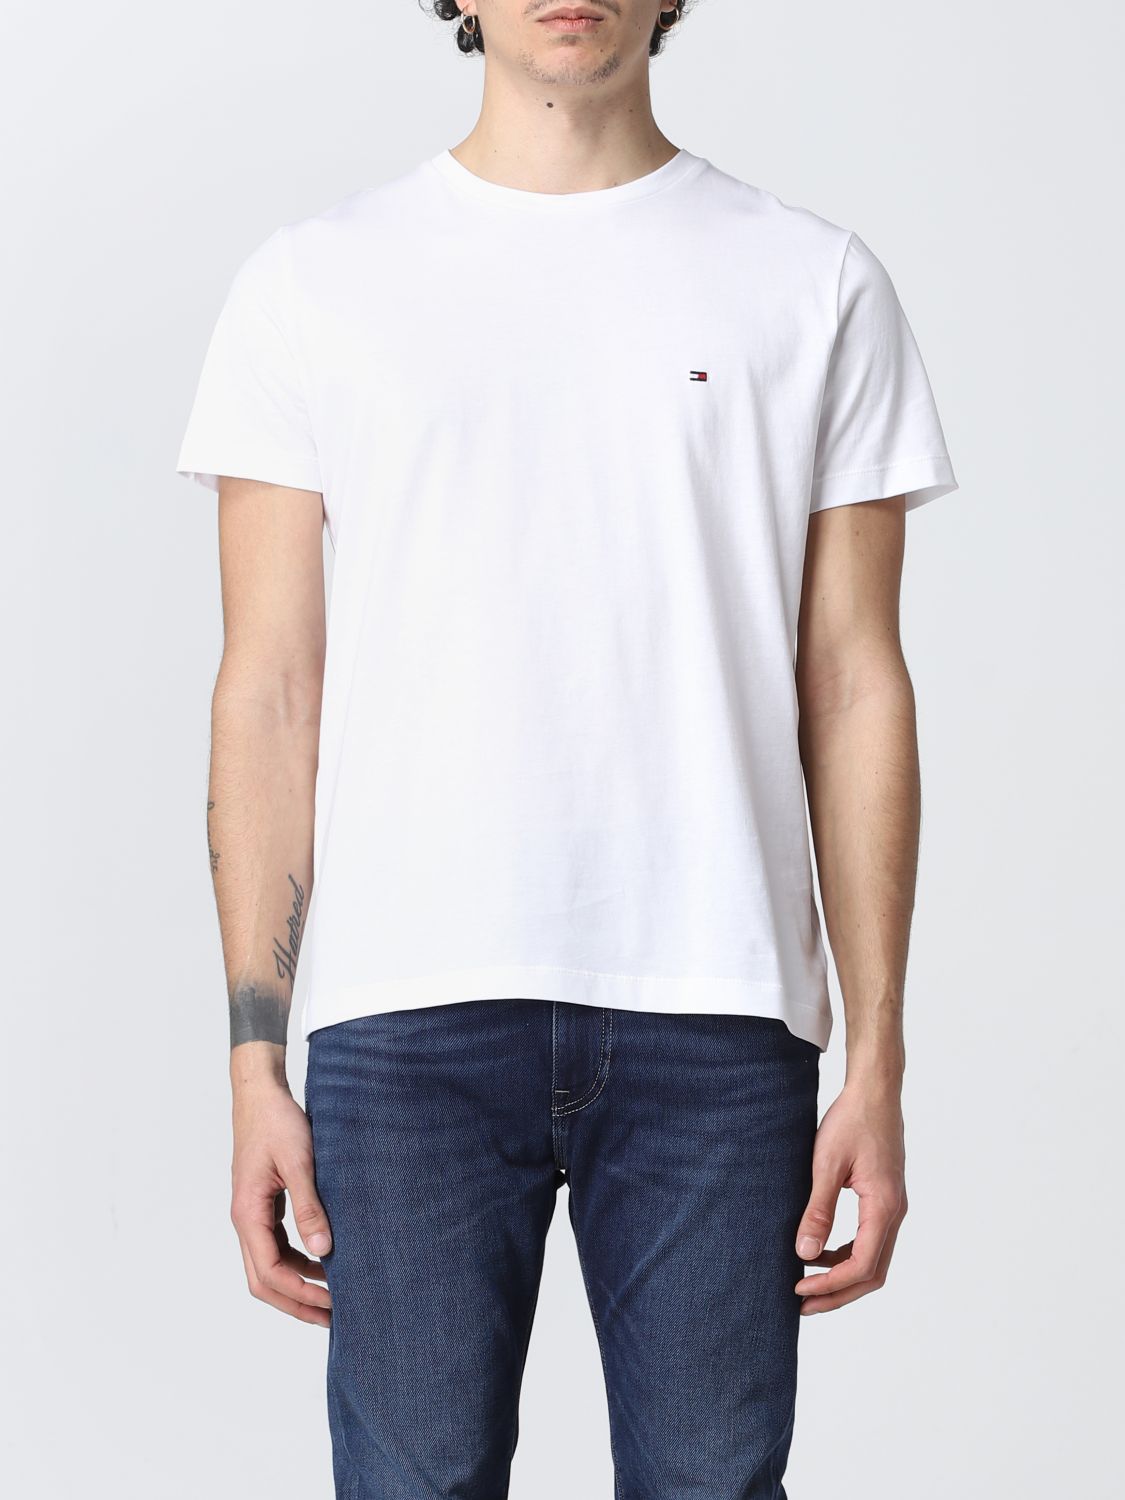 Tommy Hilfiger Outlet: T-shirt men White | Tommy Hilfiger MW0MW24546 on GIGLIO.COM